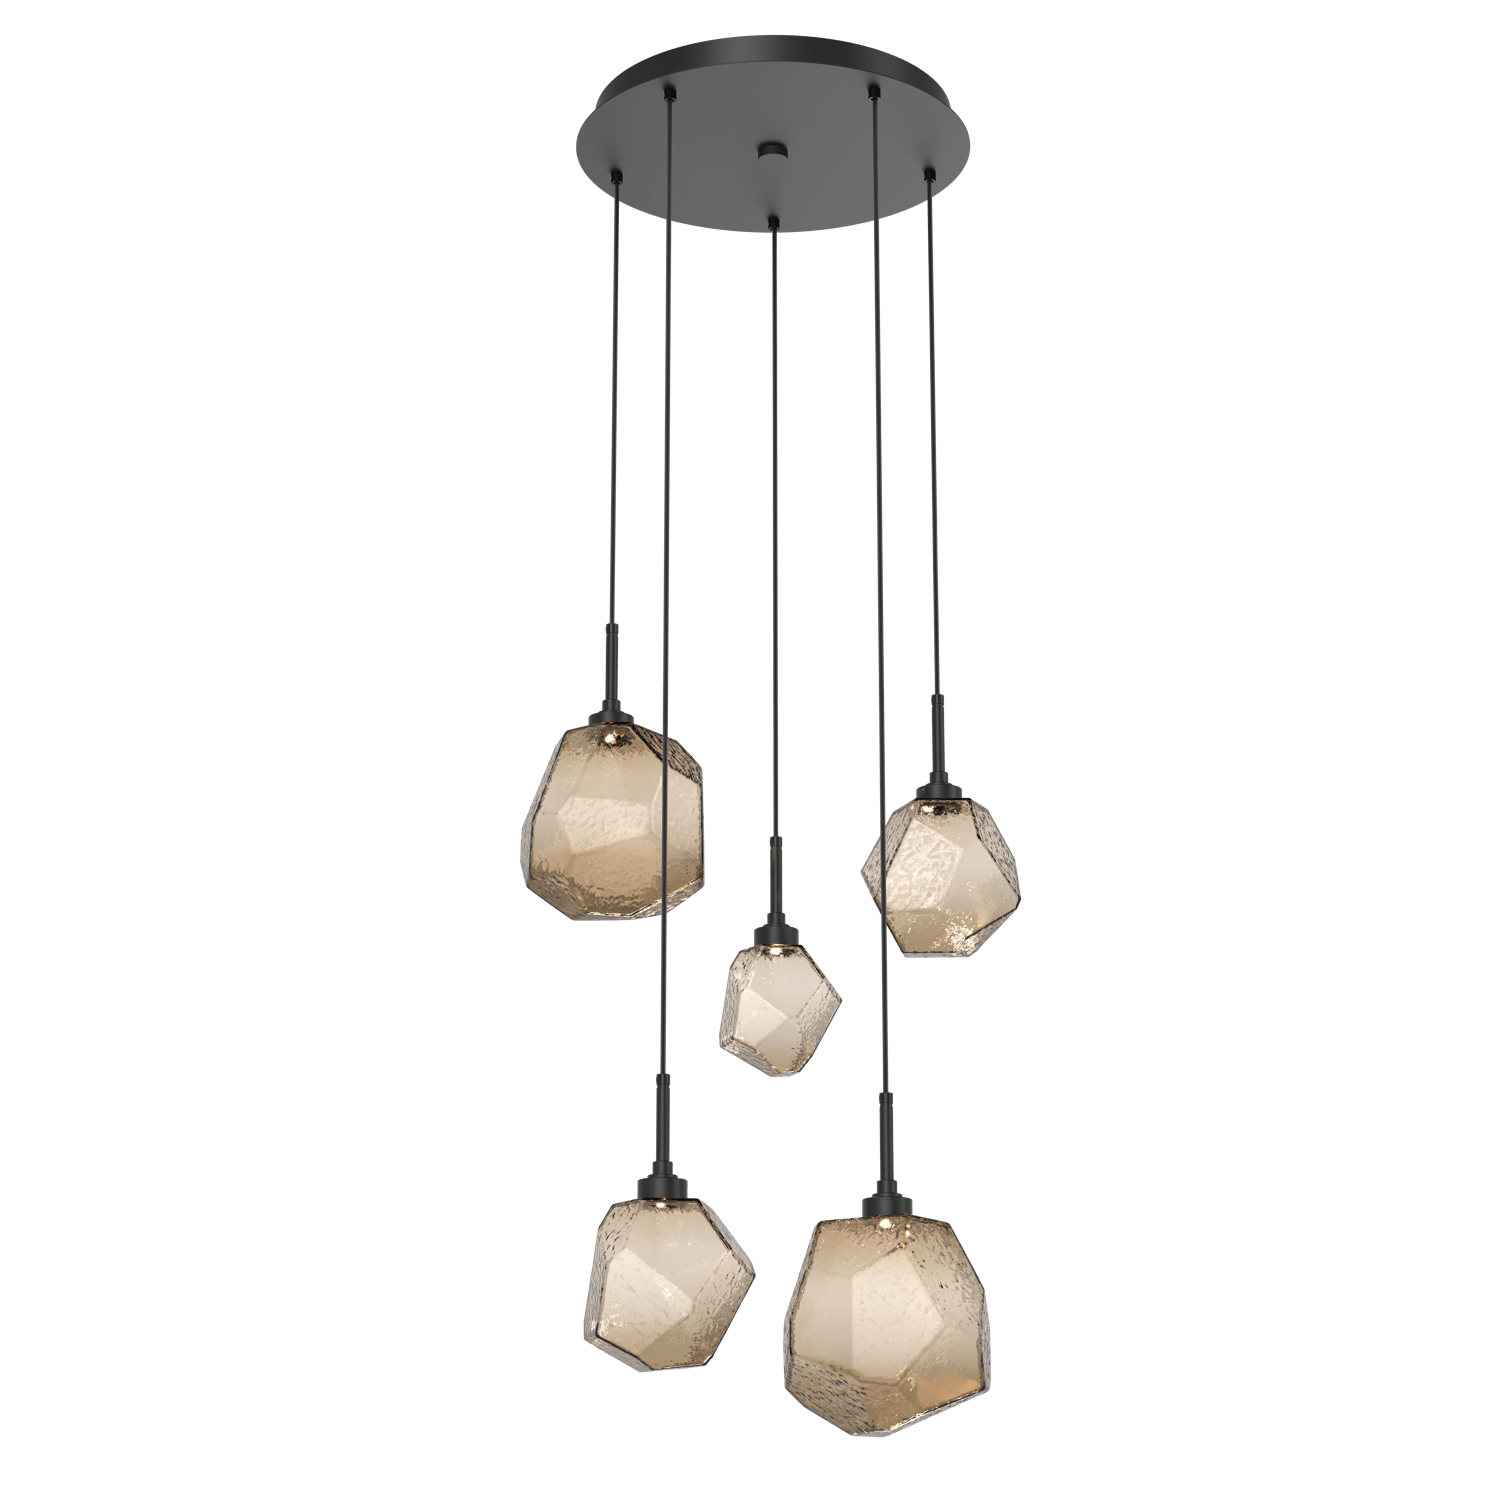 CHB0039-05-MB-B-Hammerton-Studio-Gem-5-light-round-pendant-chandelier-with-matte-black-finish-and-bronze-blown-glass-shades-and-LED-lamping